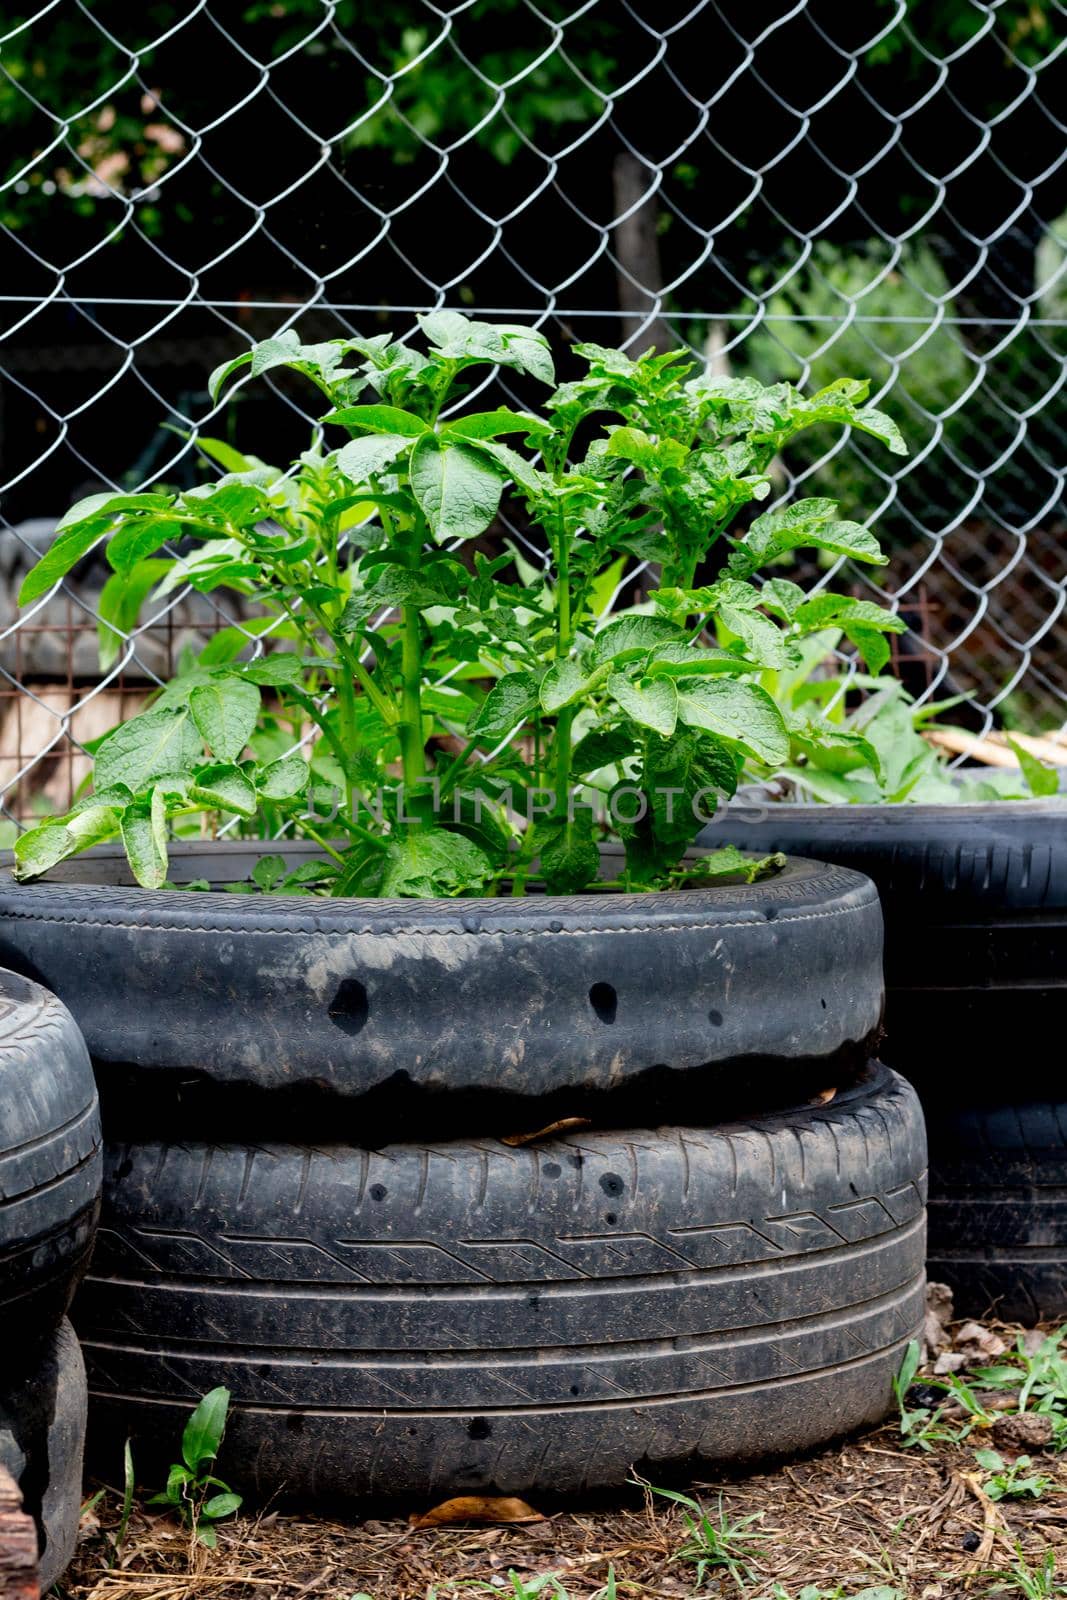 growing potatoes vertically recycling car tires